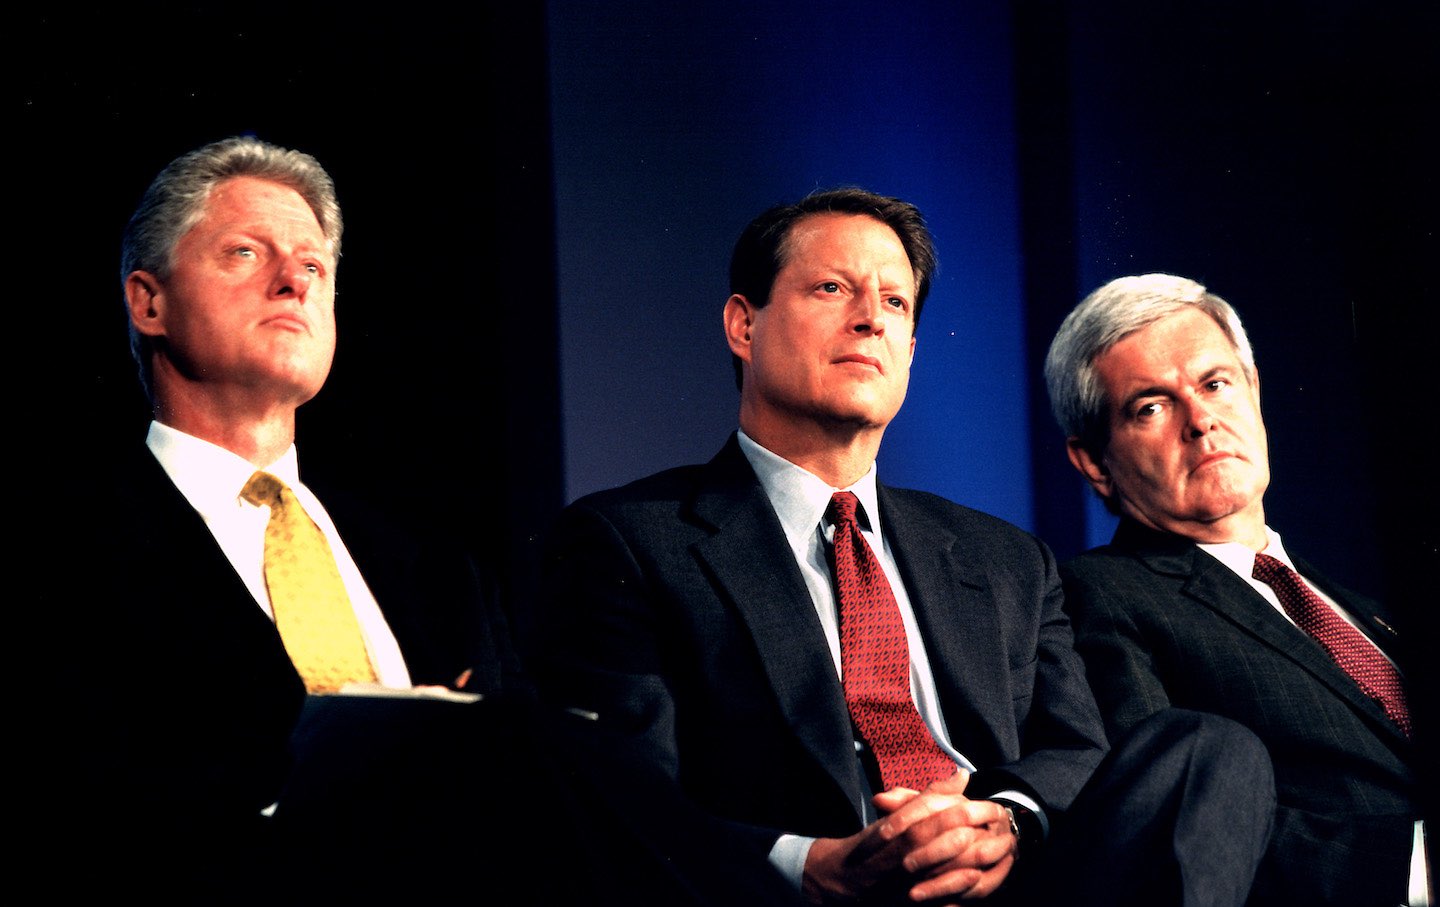 Bill Clinton and Newt Gingrich and Al Gore